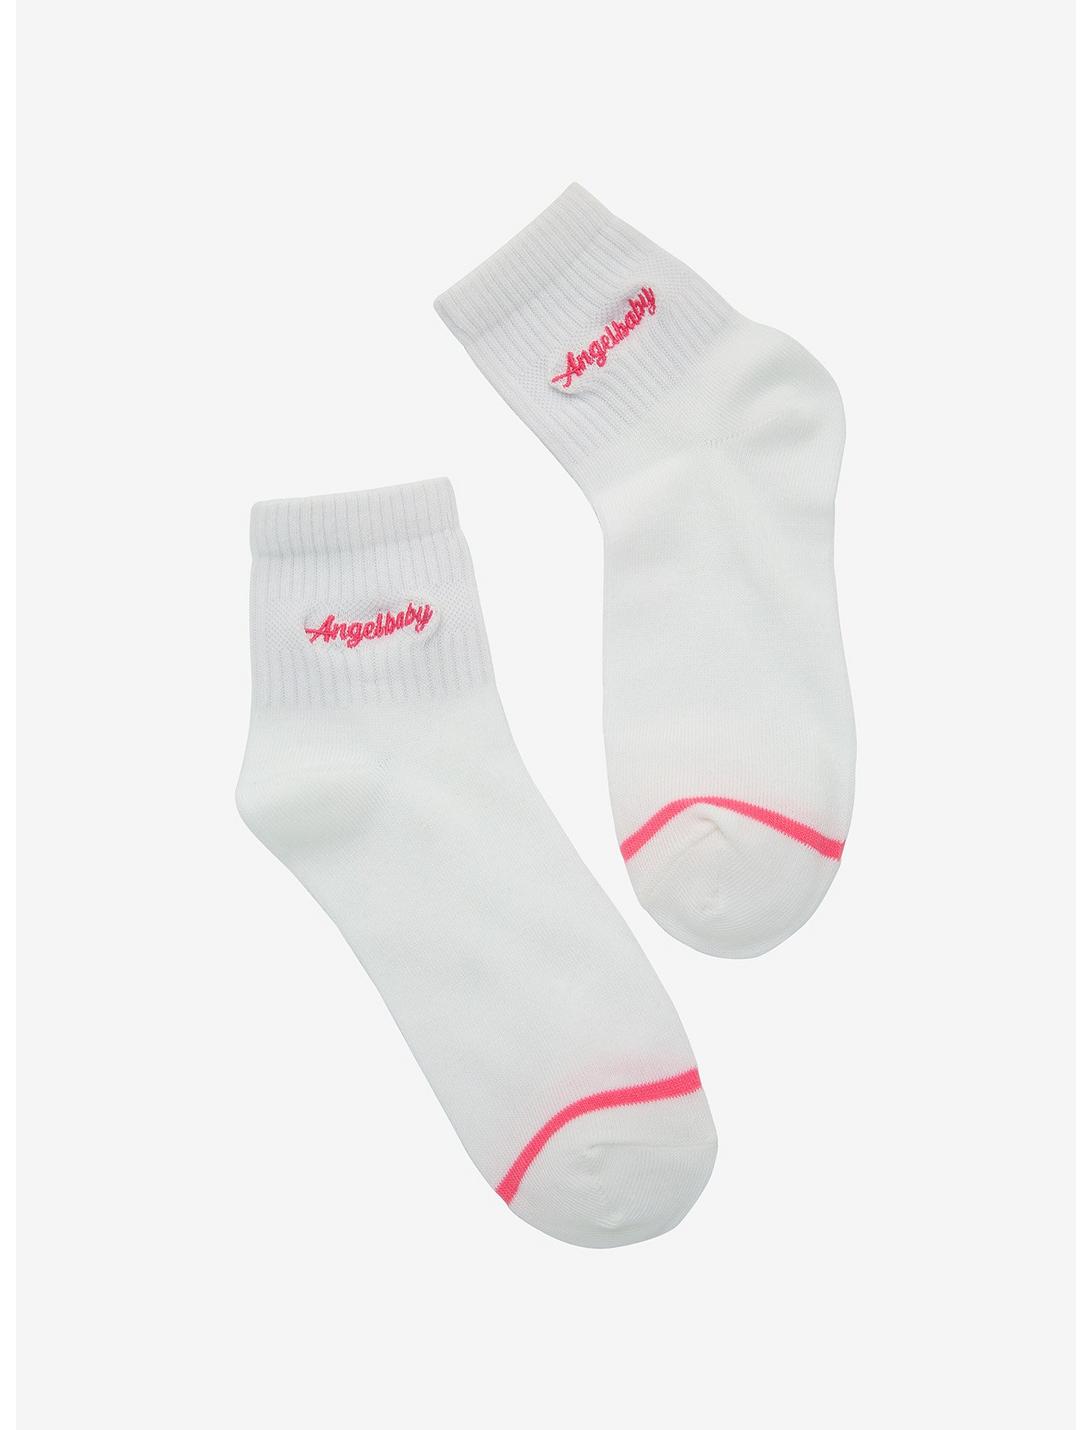 Angelbaby Embroidered Ankle Socks, , hi-res